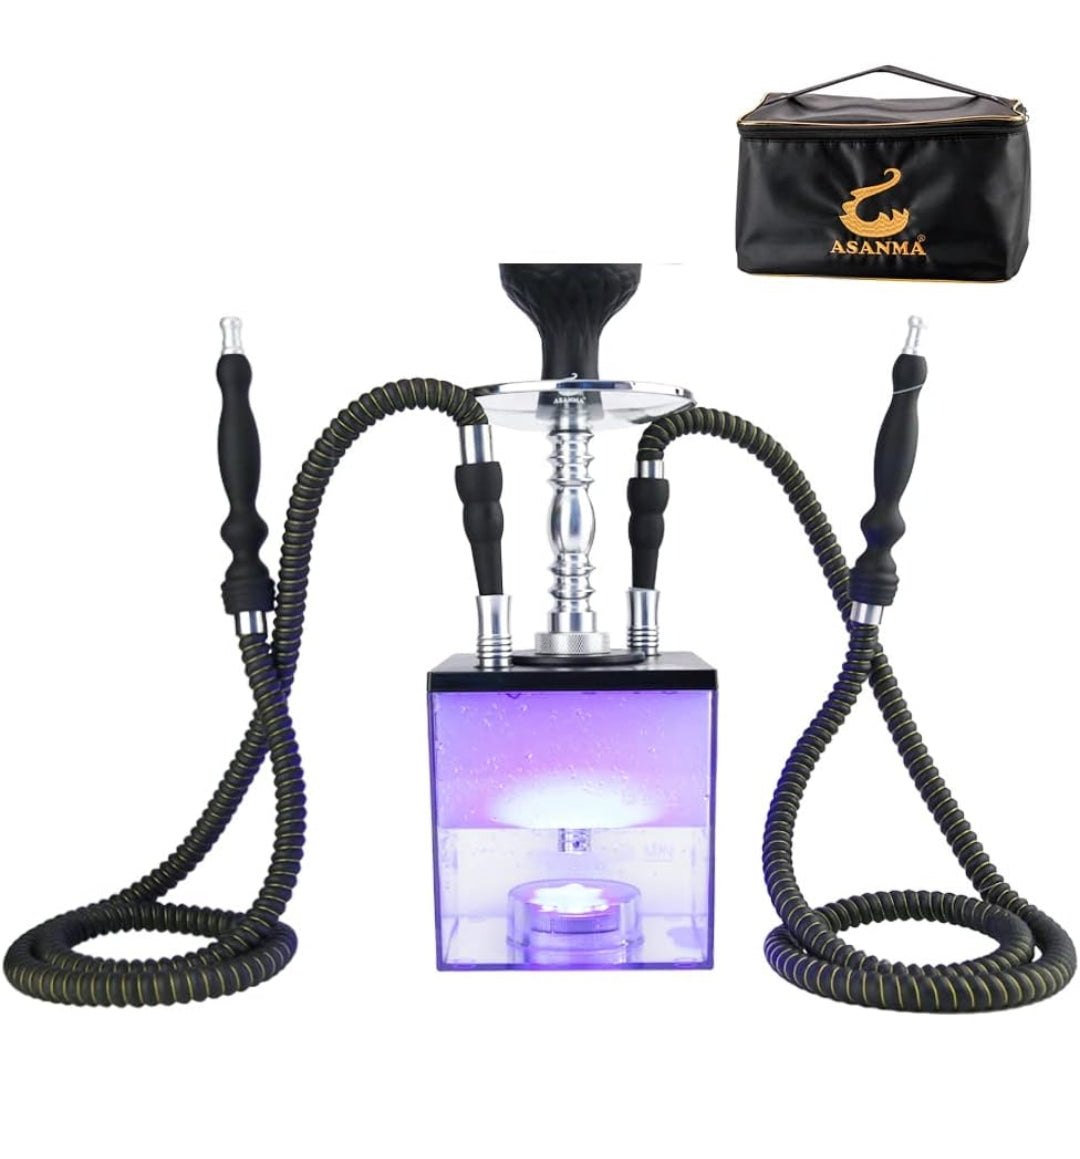 Yocan The One Wax Vaporizer & Nectar Collector **PICKUP ONLY** – Happy  Trails Inc & Joe's Smoke Shop